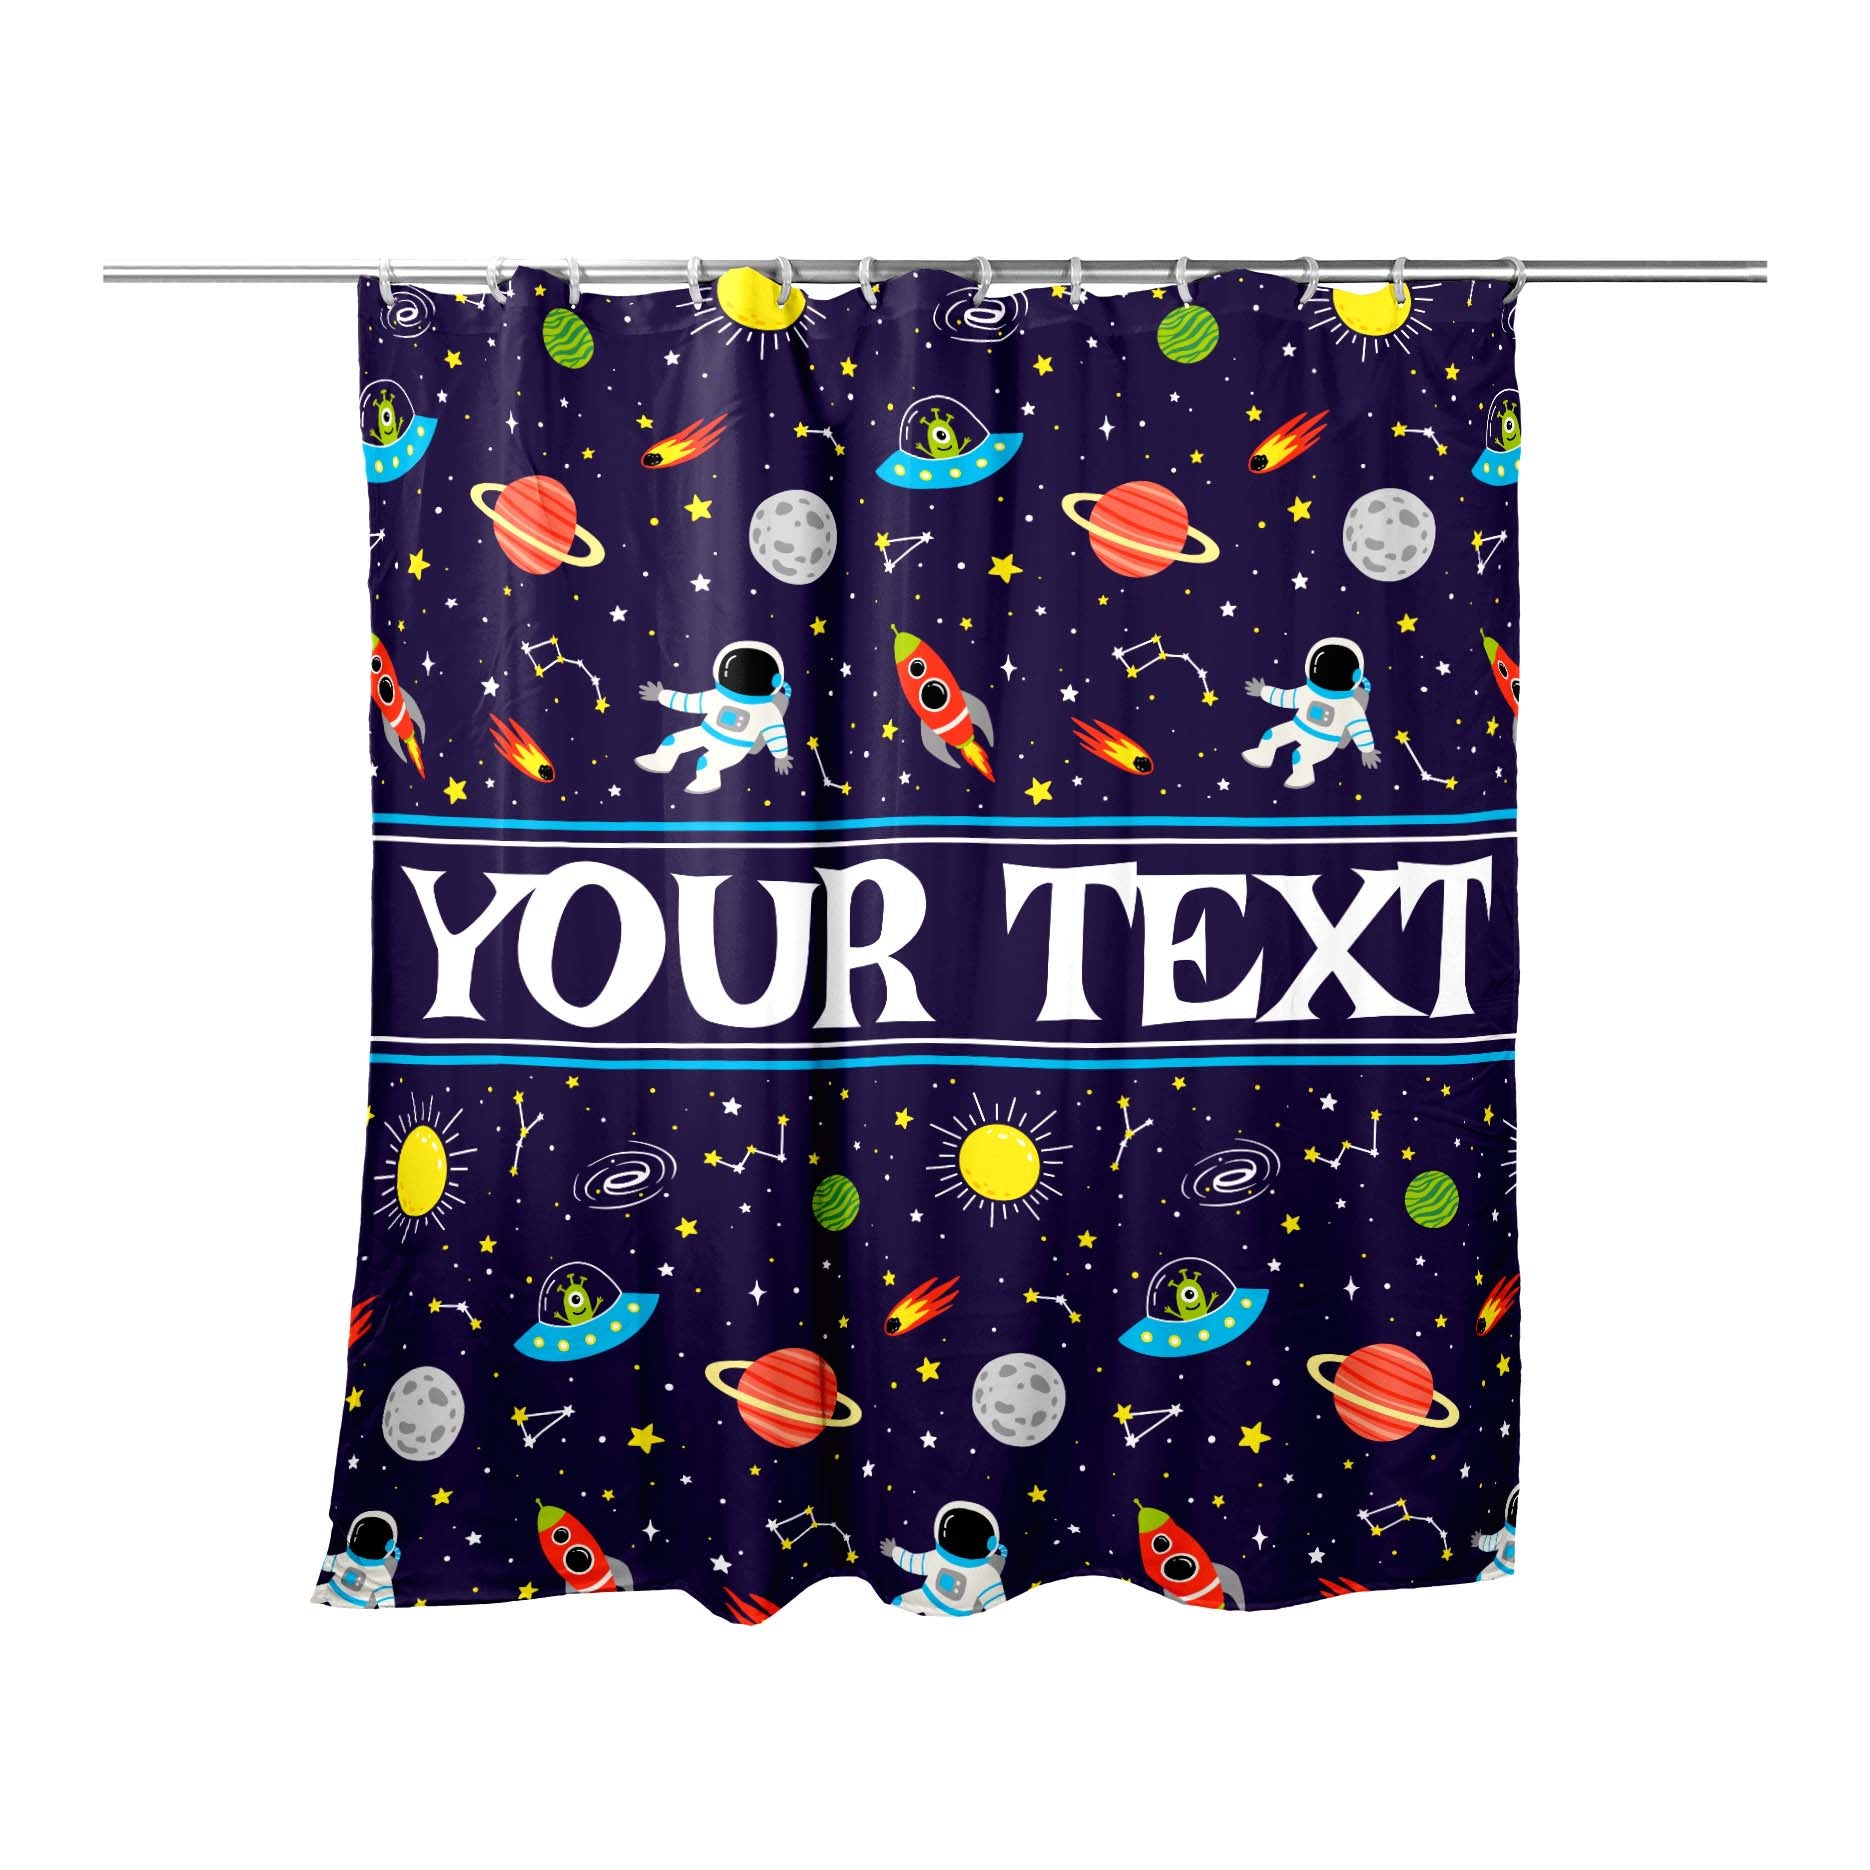 Personalized Shower Curtain - Space - 71" x 74"